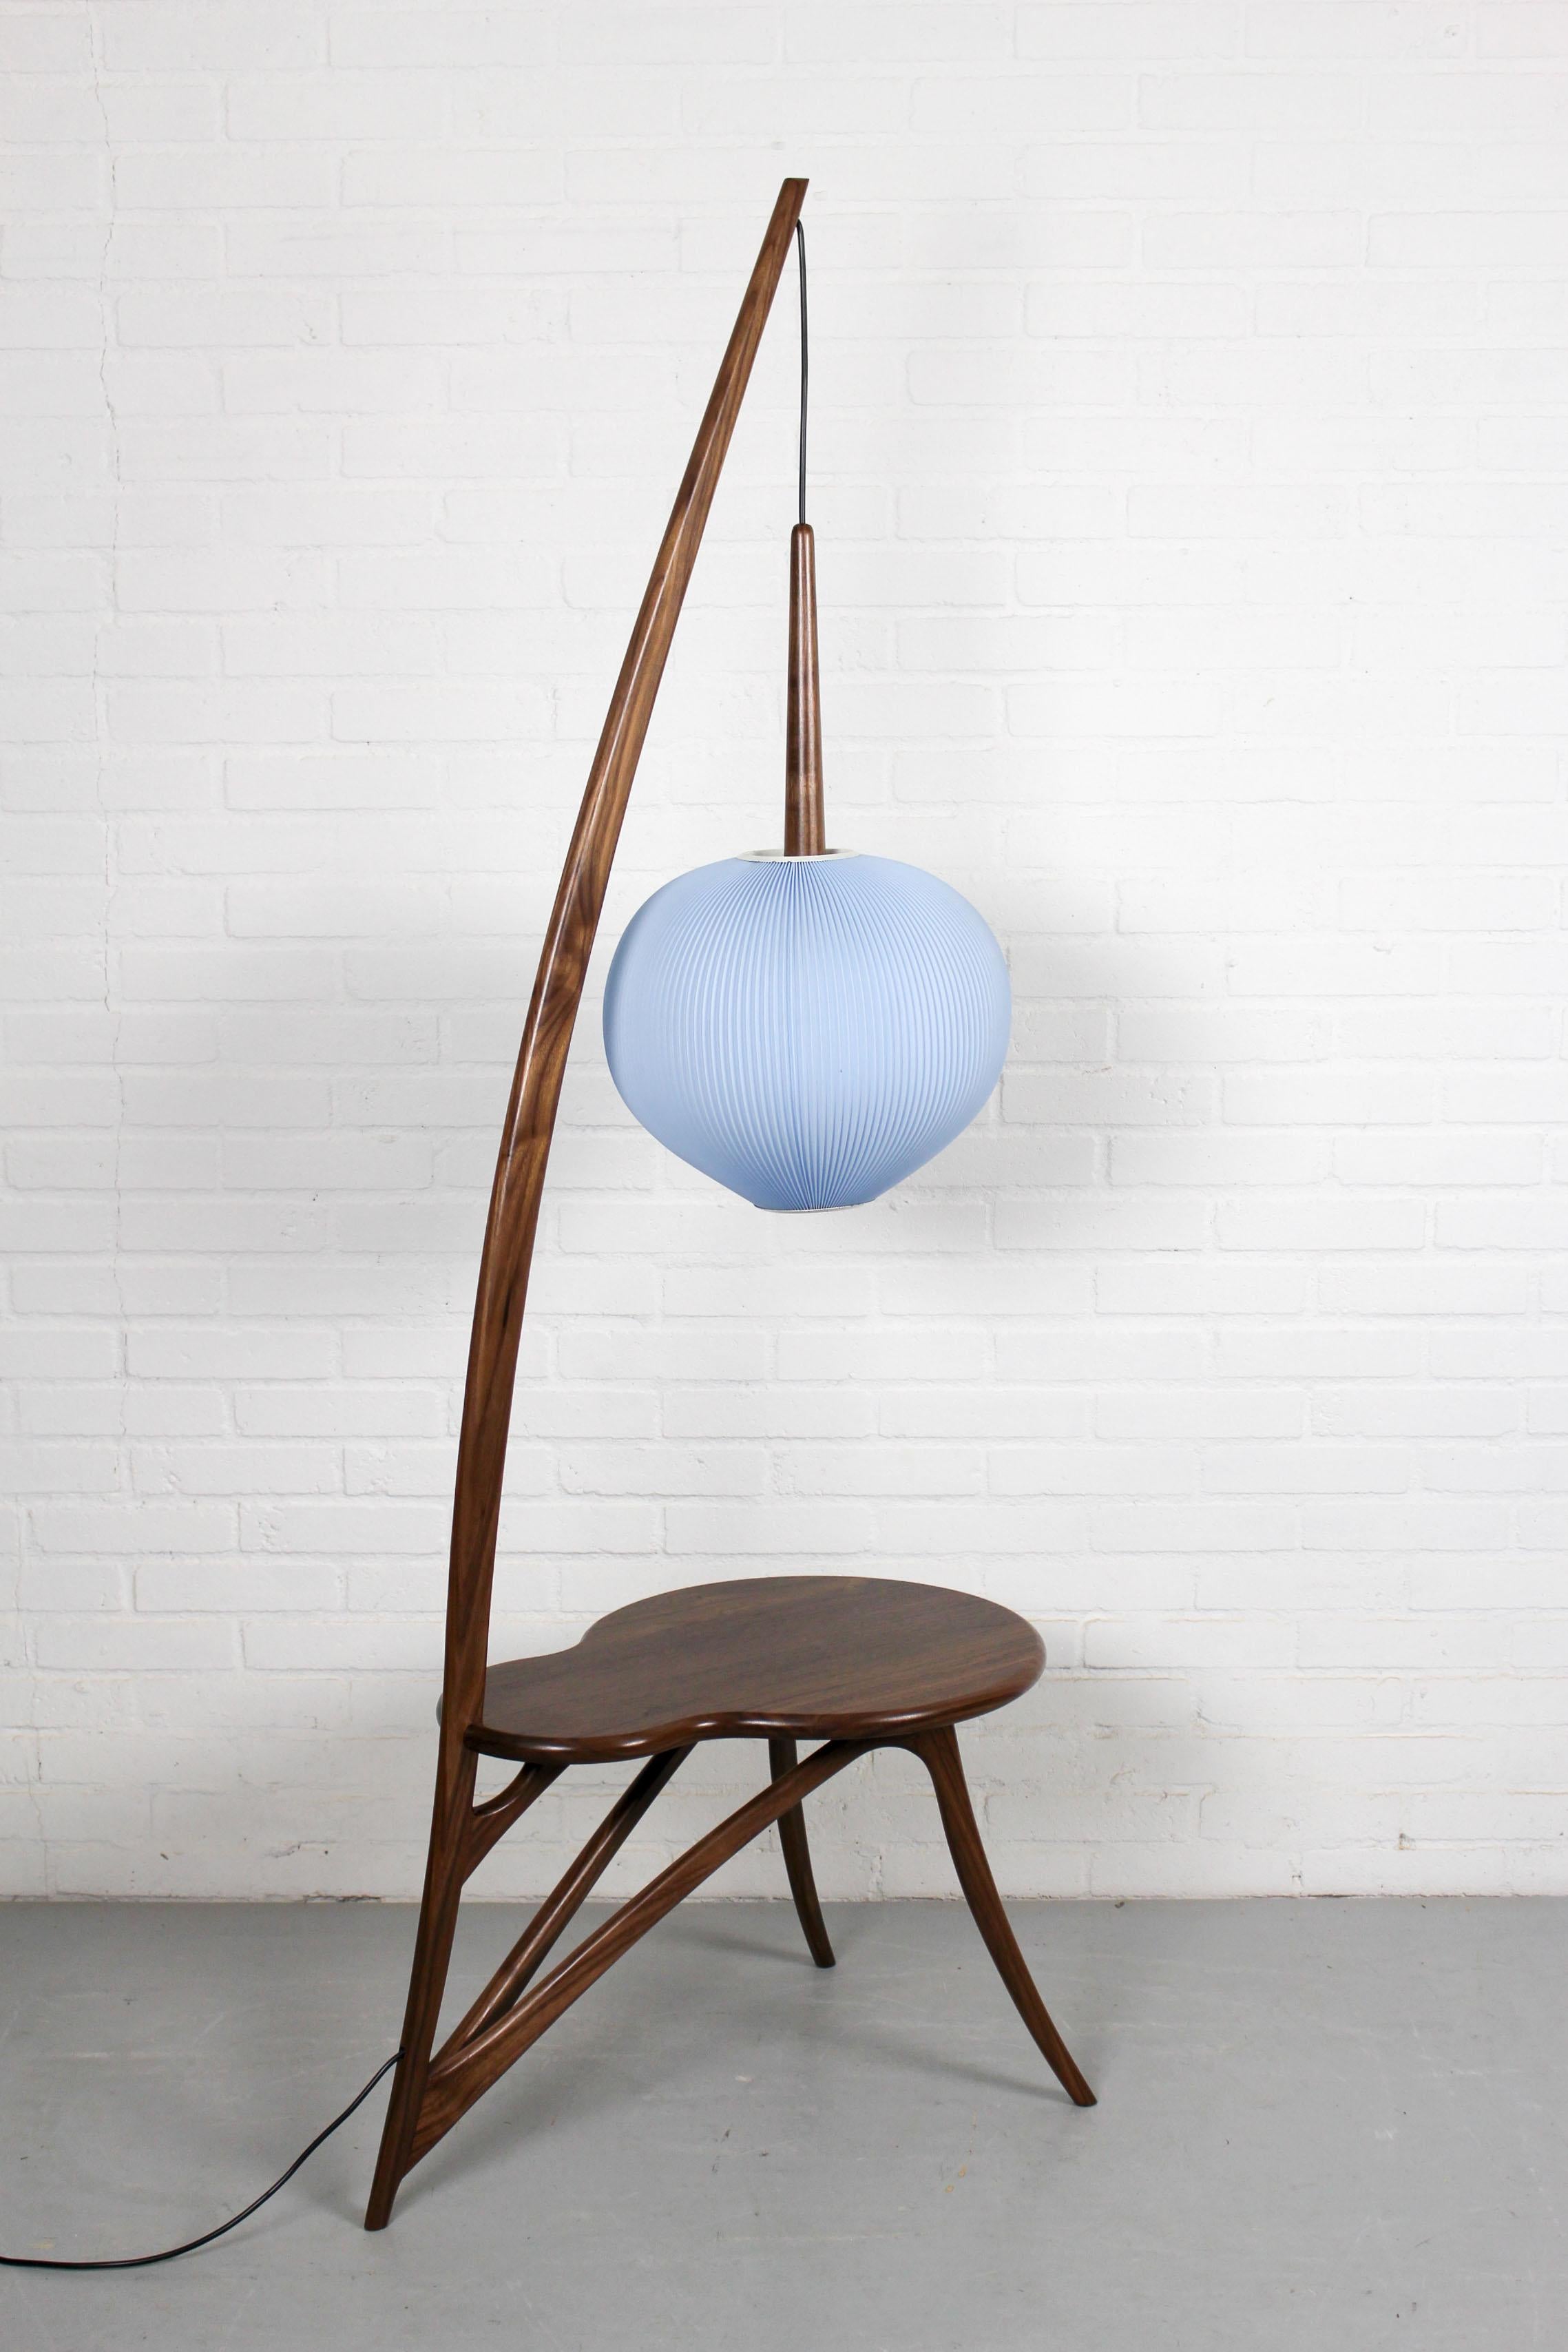 This original plissee lamp has an organically shaped American nut foot with attached table so it can be used as standing floor lamp. The blue lamp itself is in original and good condition. Dimensions: 170cm H, 68 D, 42 W.
  